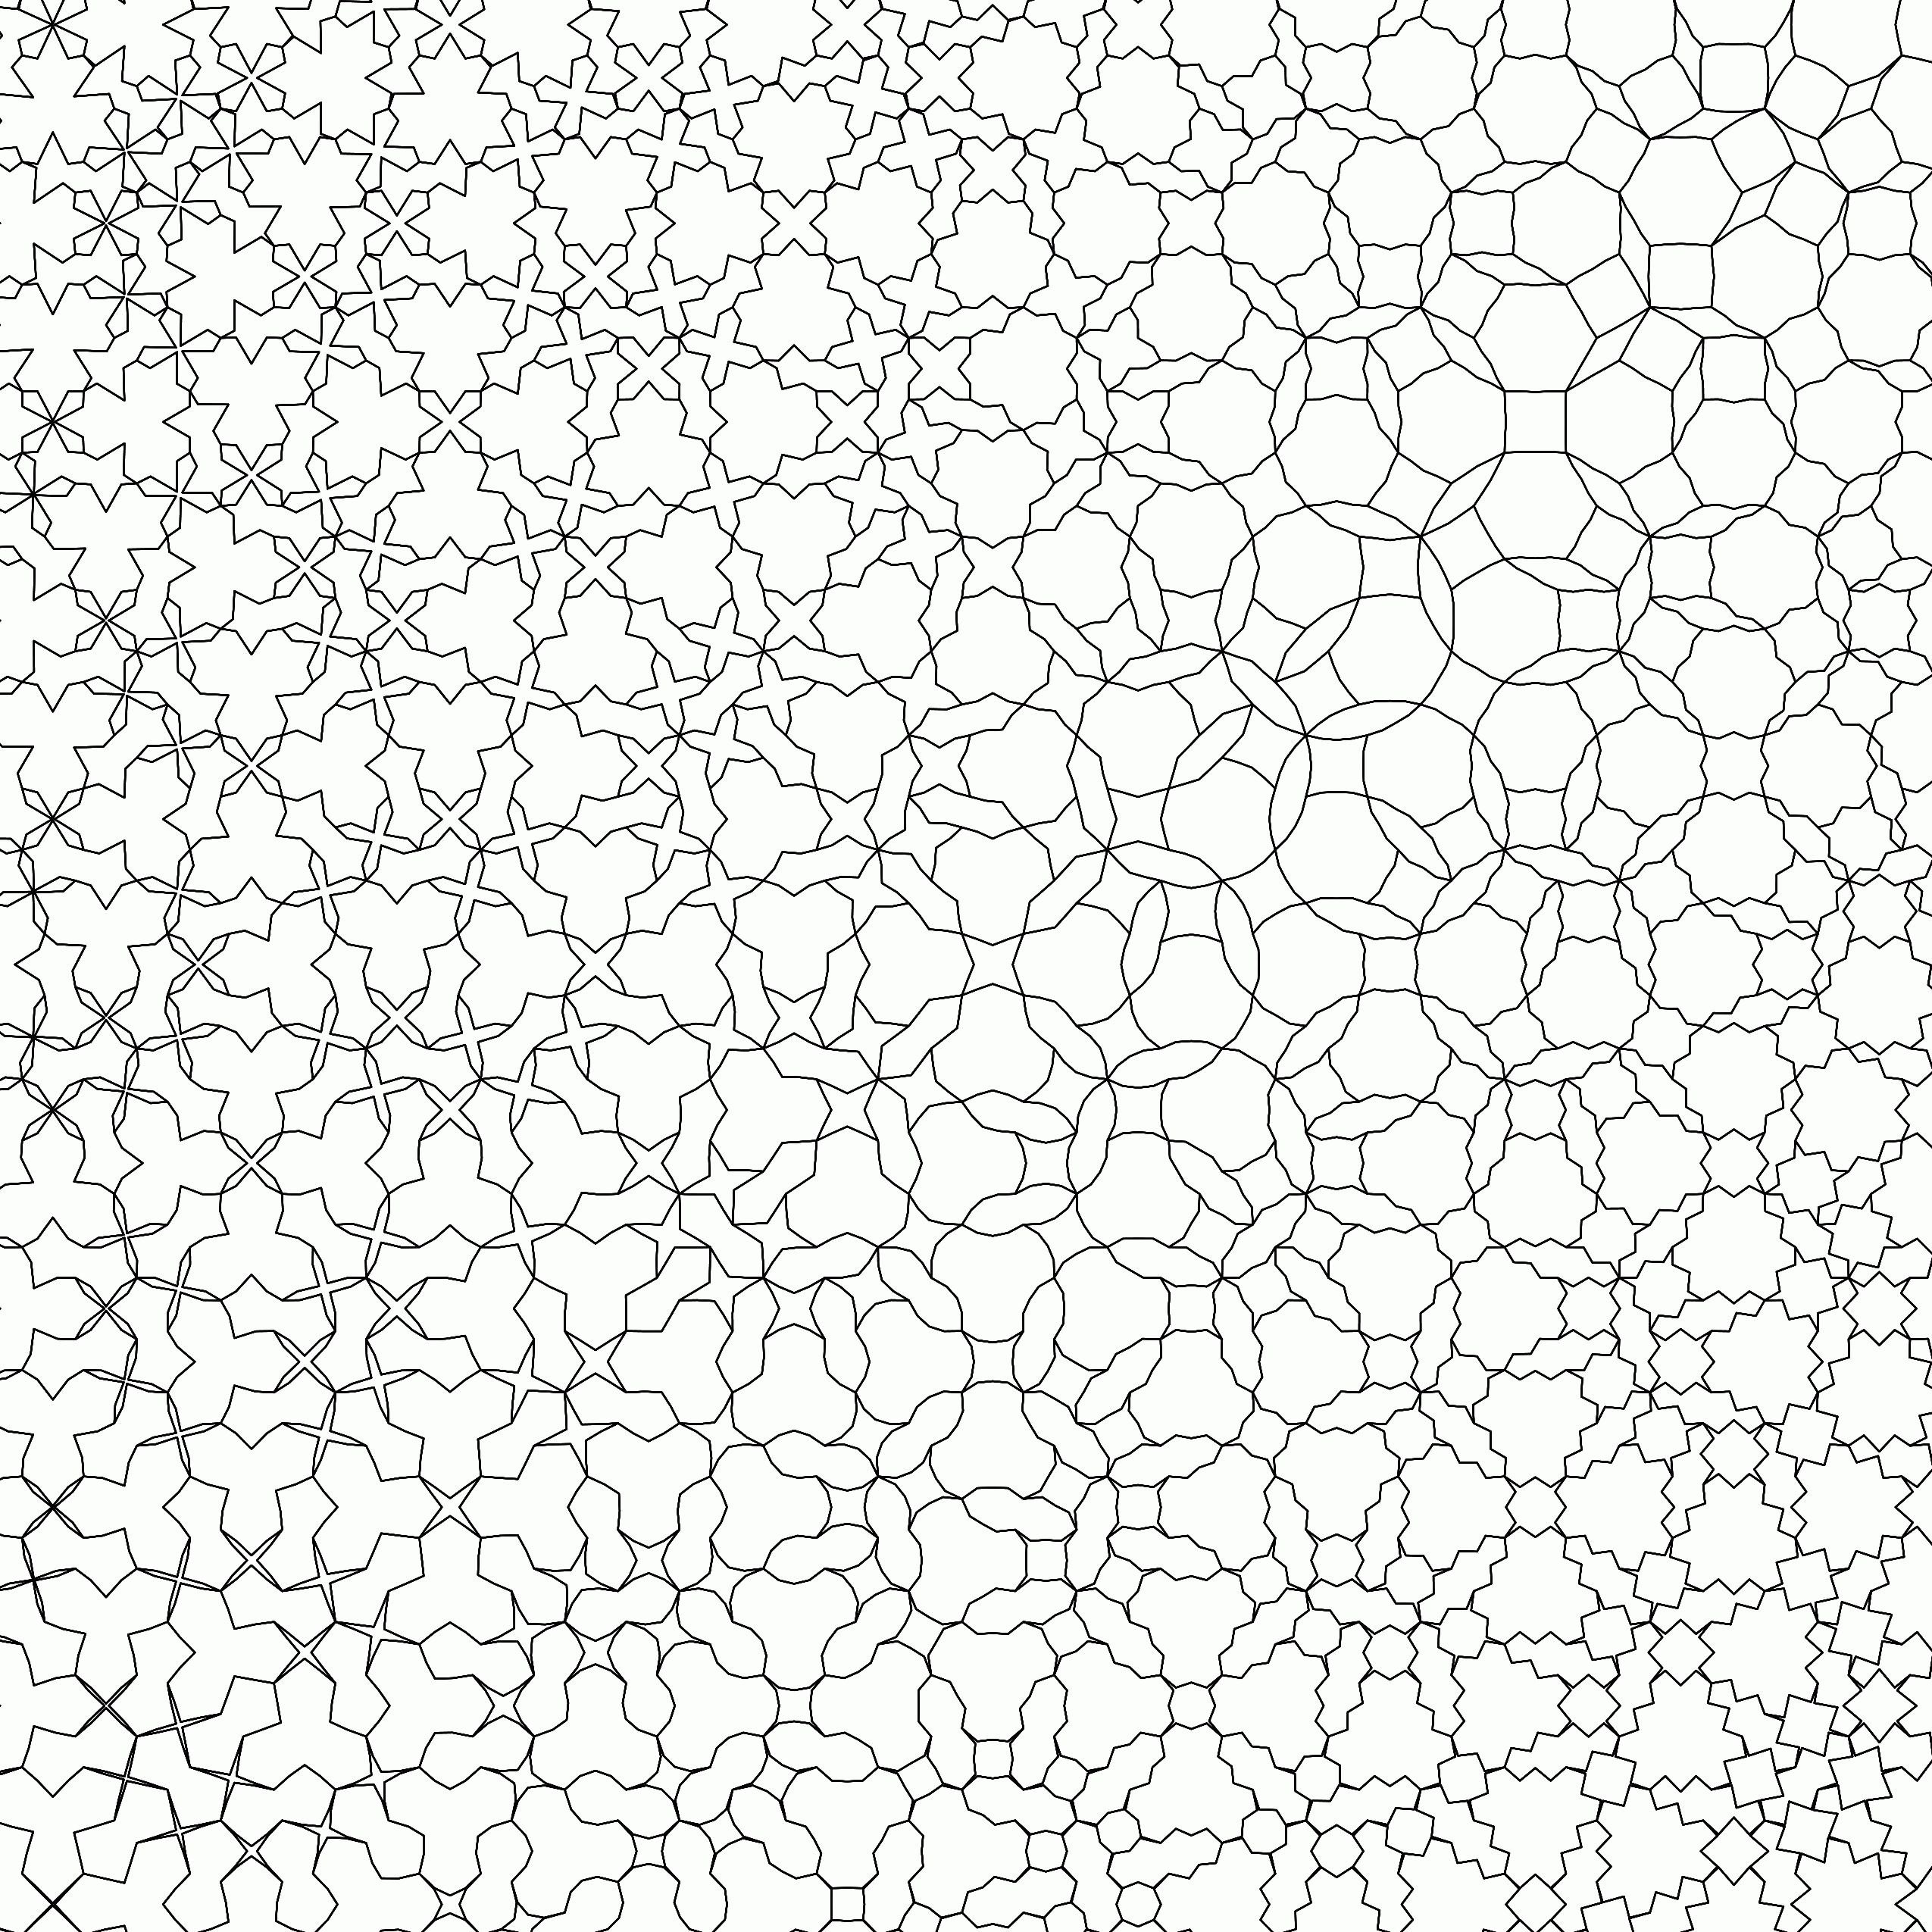 Coloring By Numbers, Mathematically